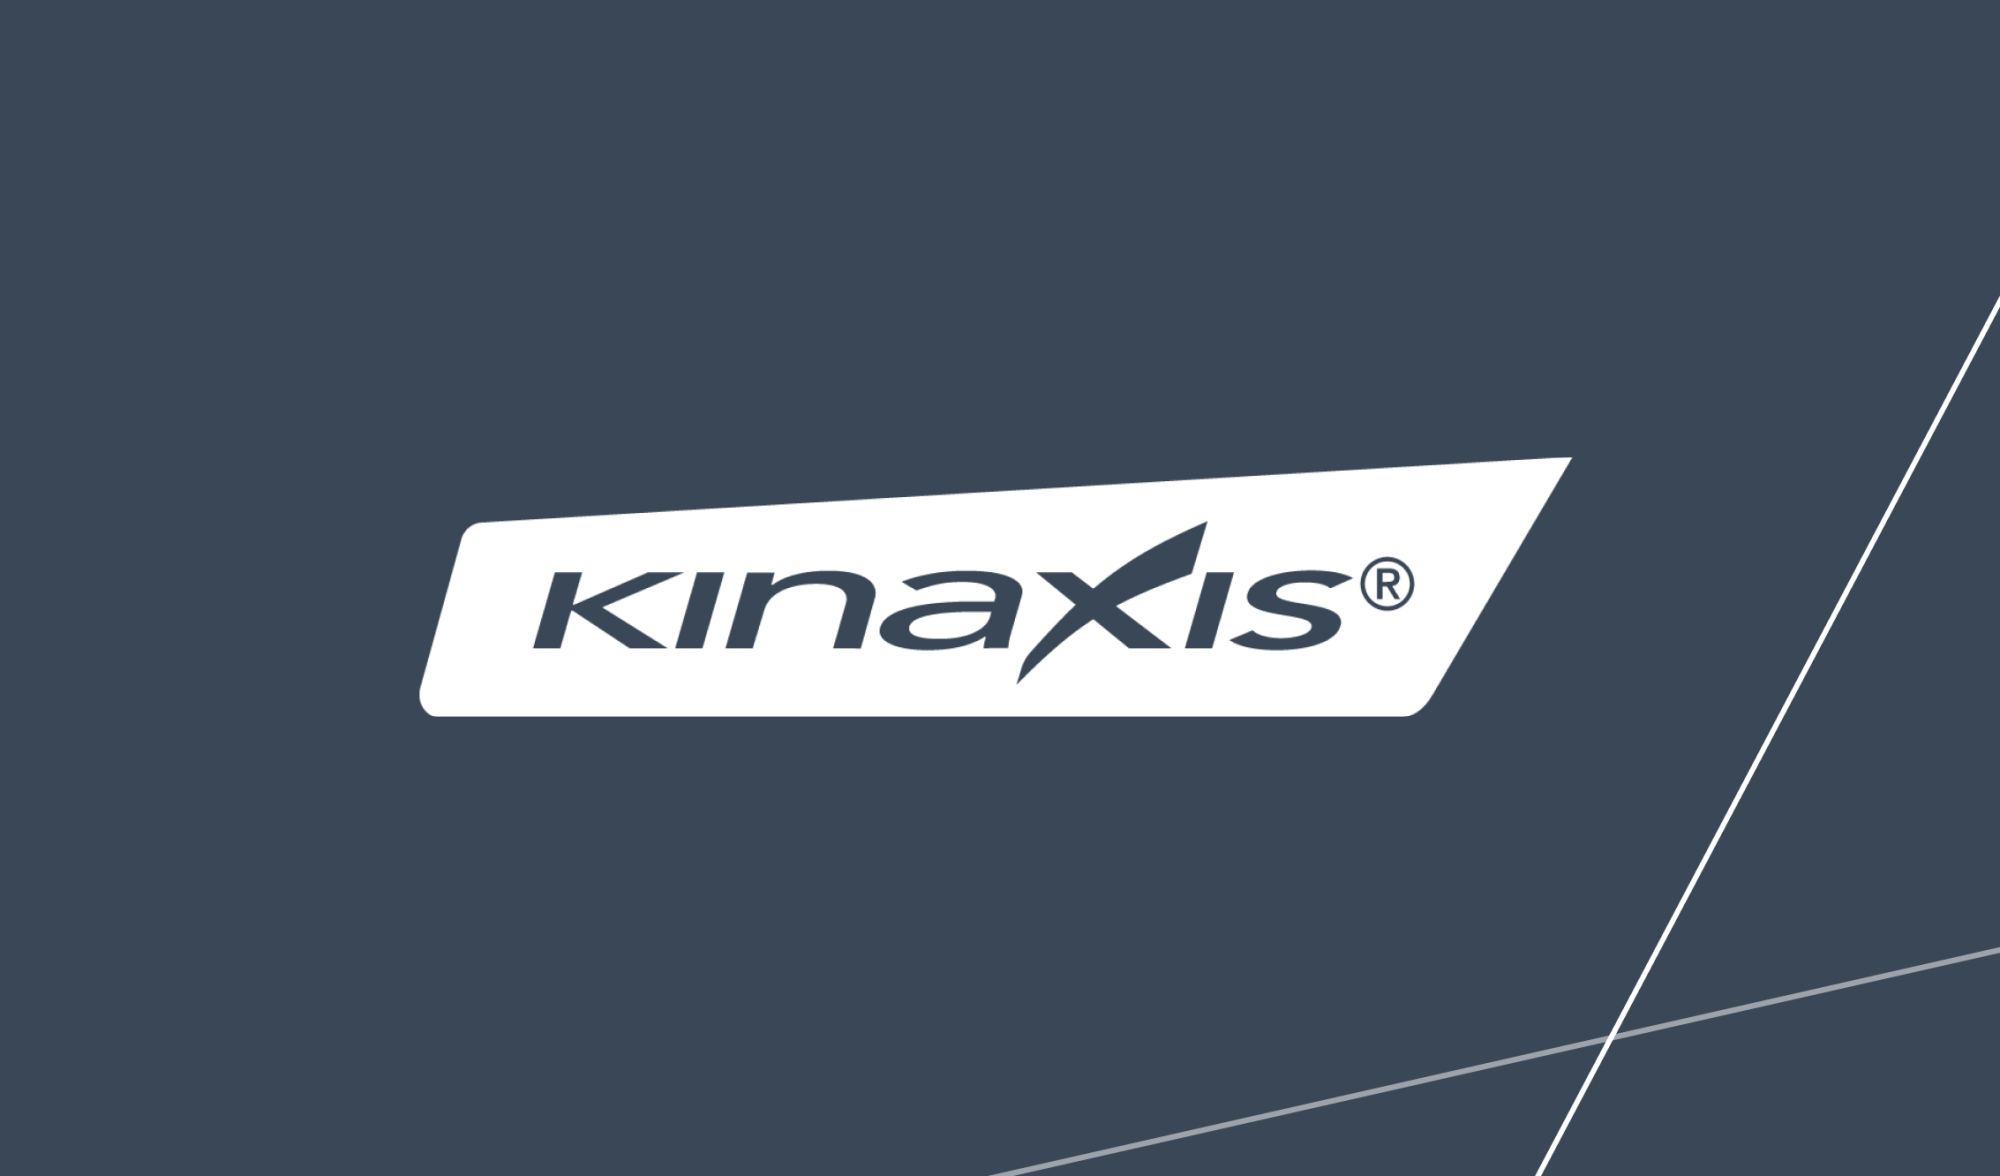 How Ottawa’s Kinaxis Uses Self-Healing AI to Strengthen Supply Chains